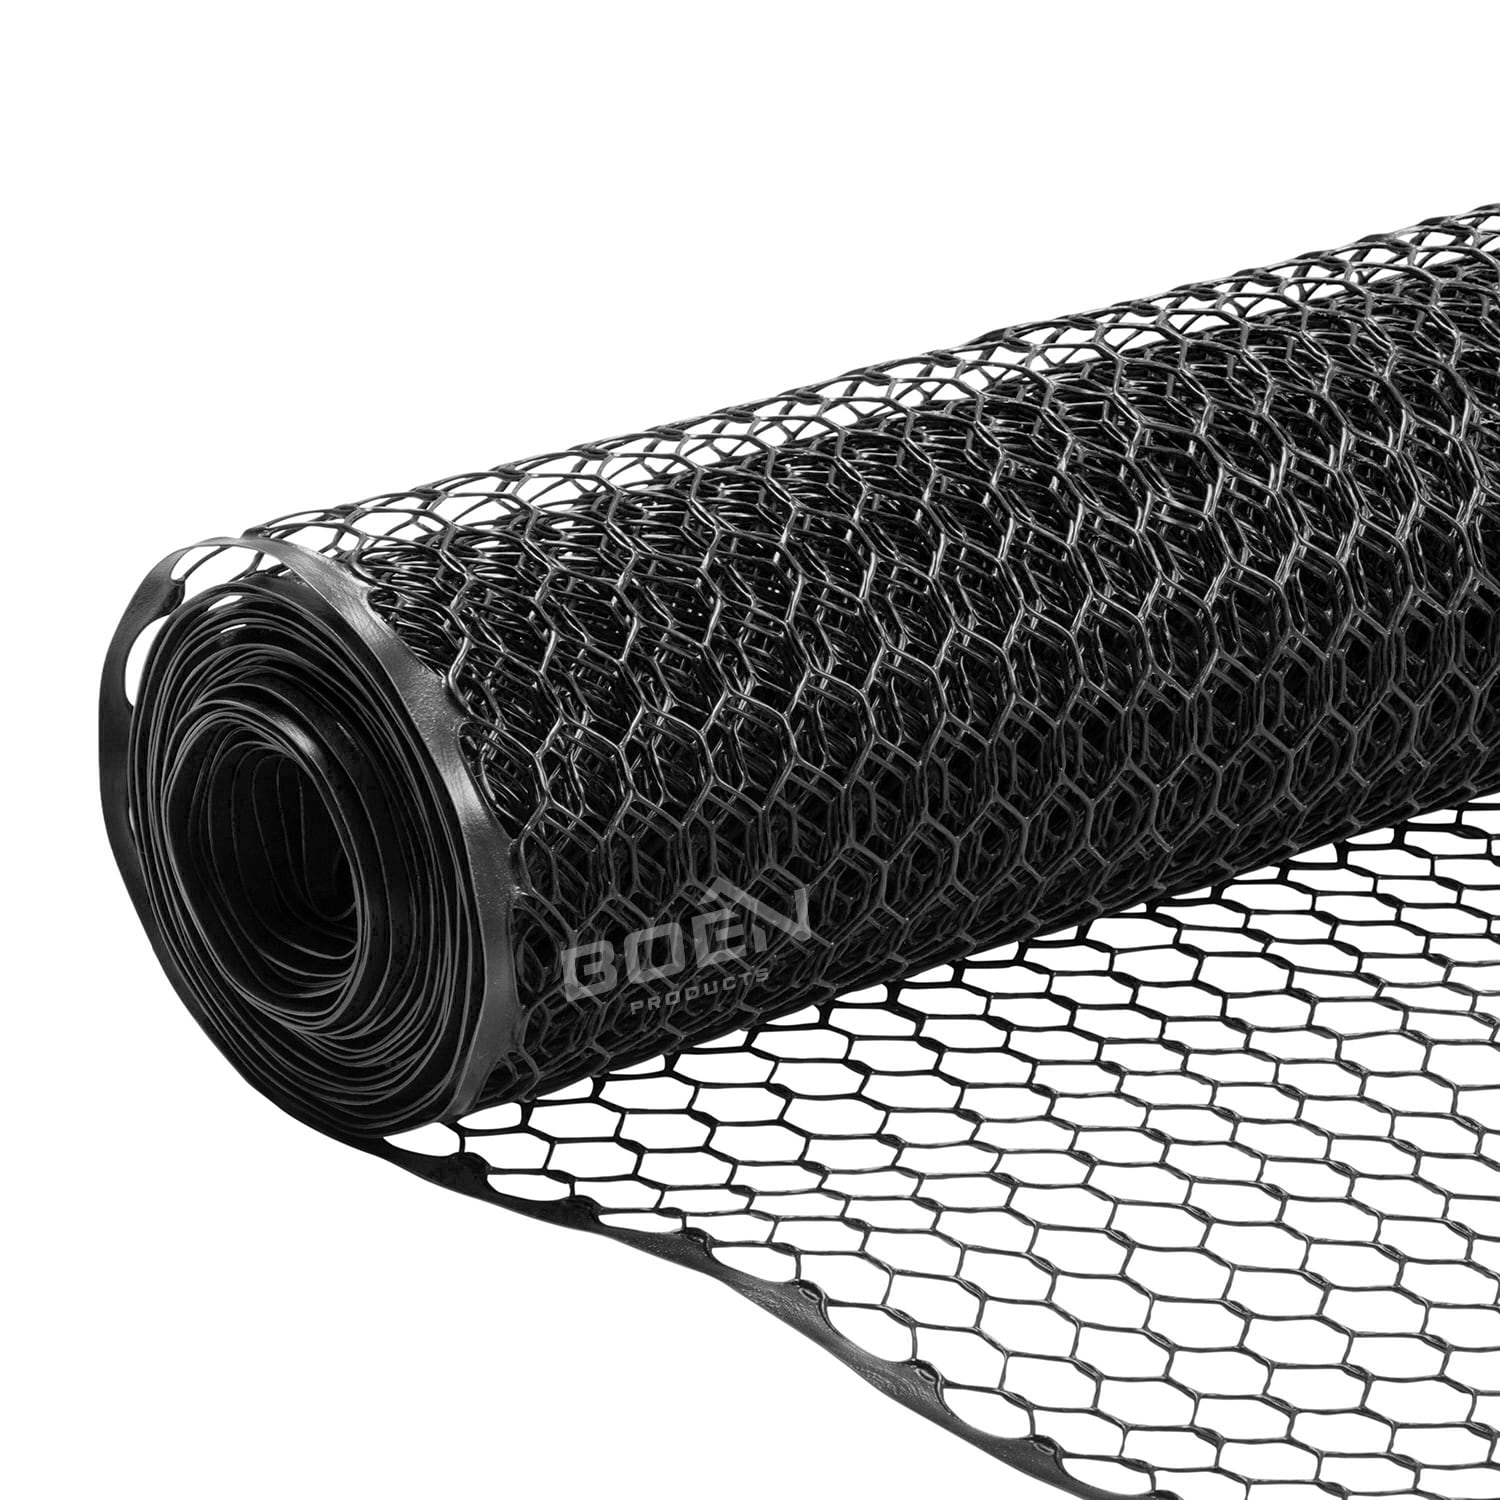 Plastic Chicken Wire Mesh (Black, 15.7 inches x 13.12 FT) Cuttable, No  Sharp Edges, Transparent, HDPE Plastic Fencing - Wire Mesh Roll for  Gardening